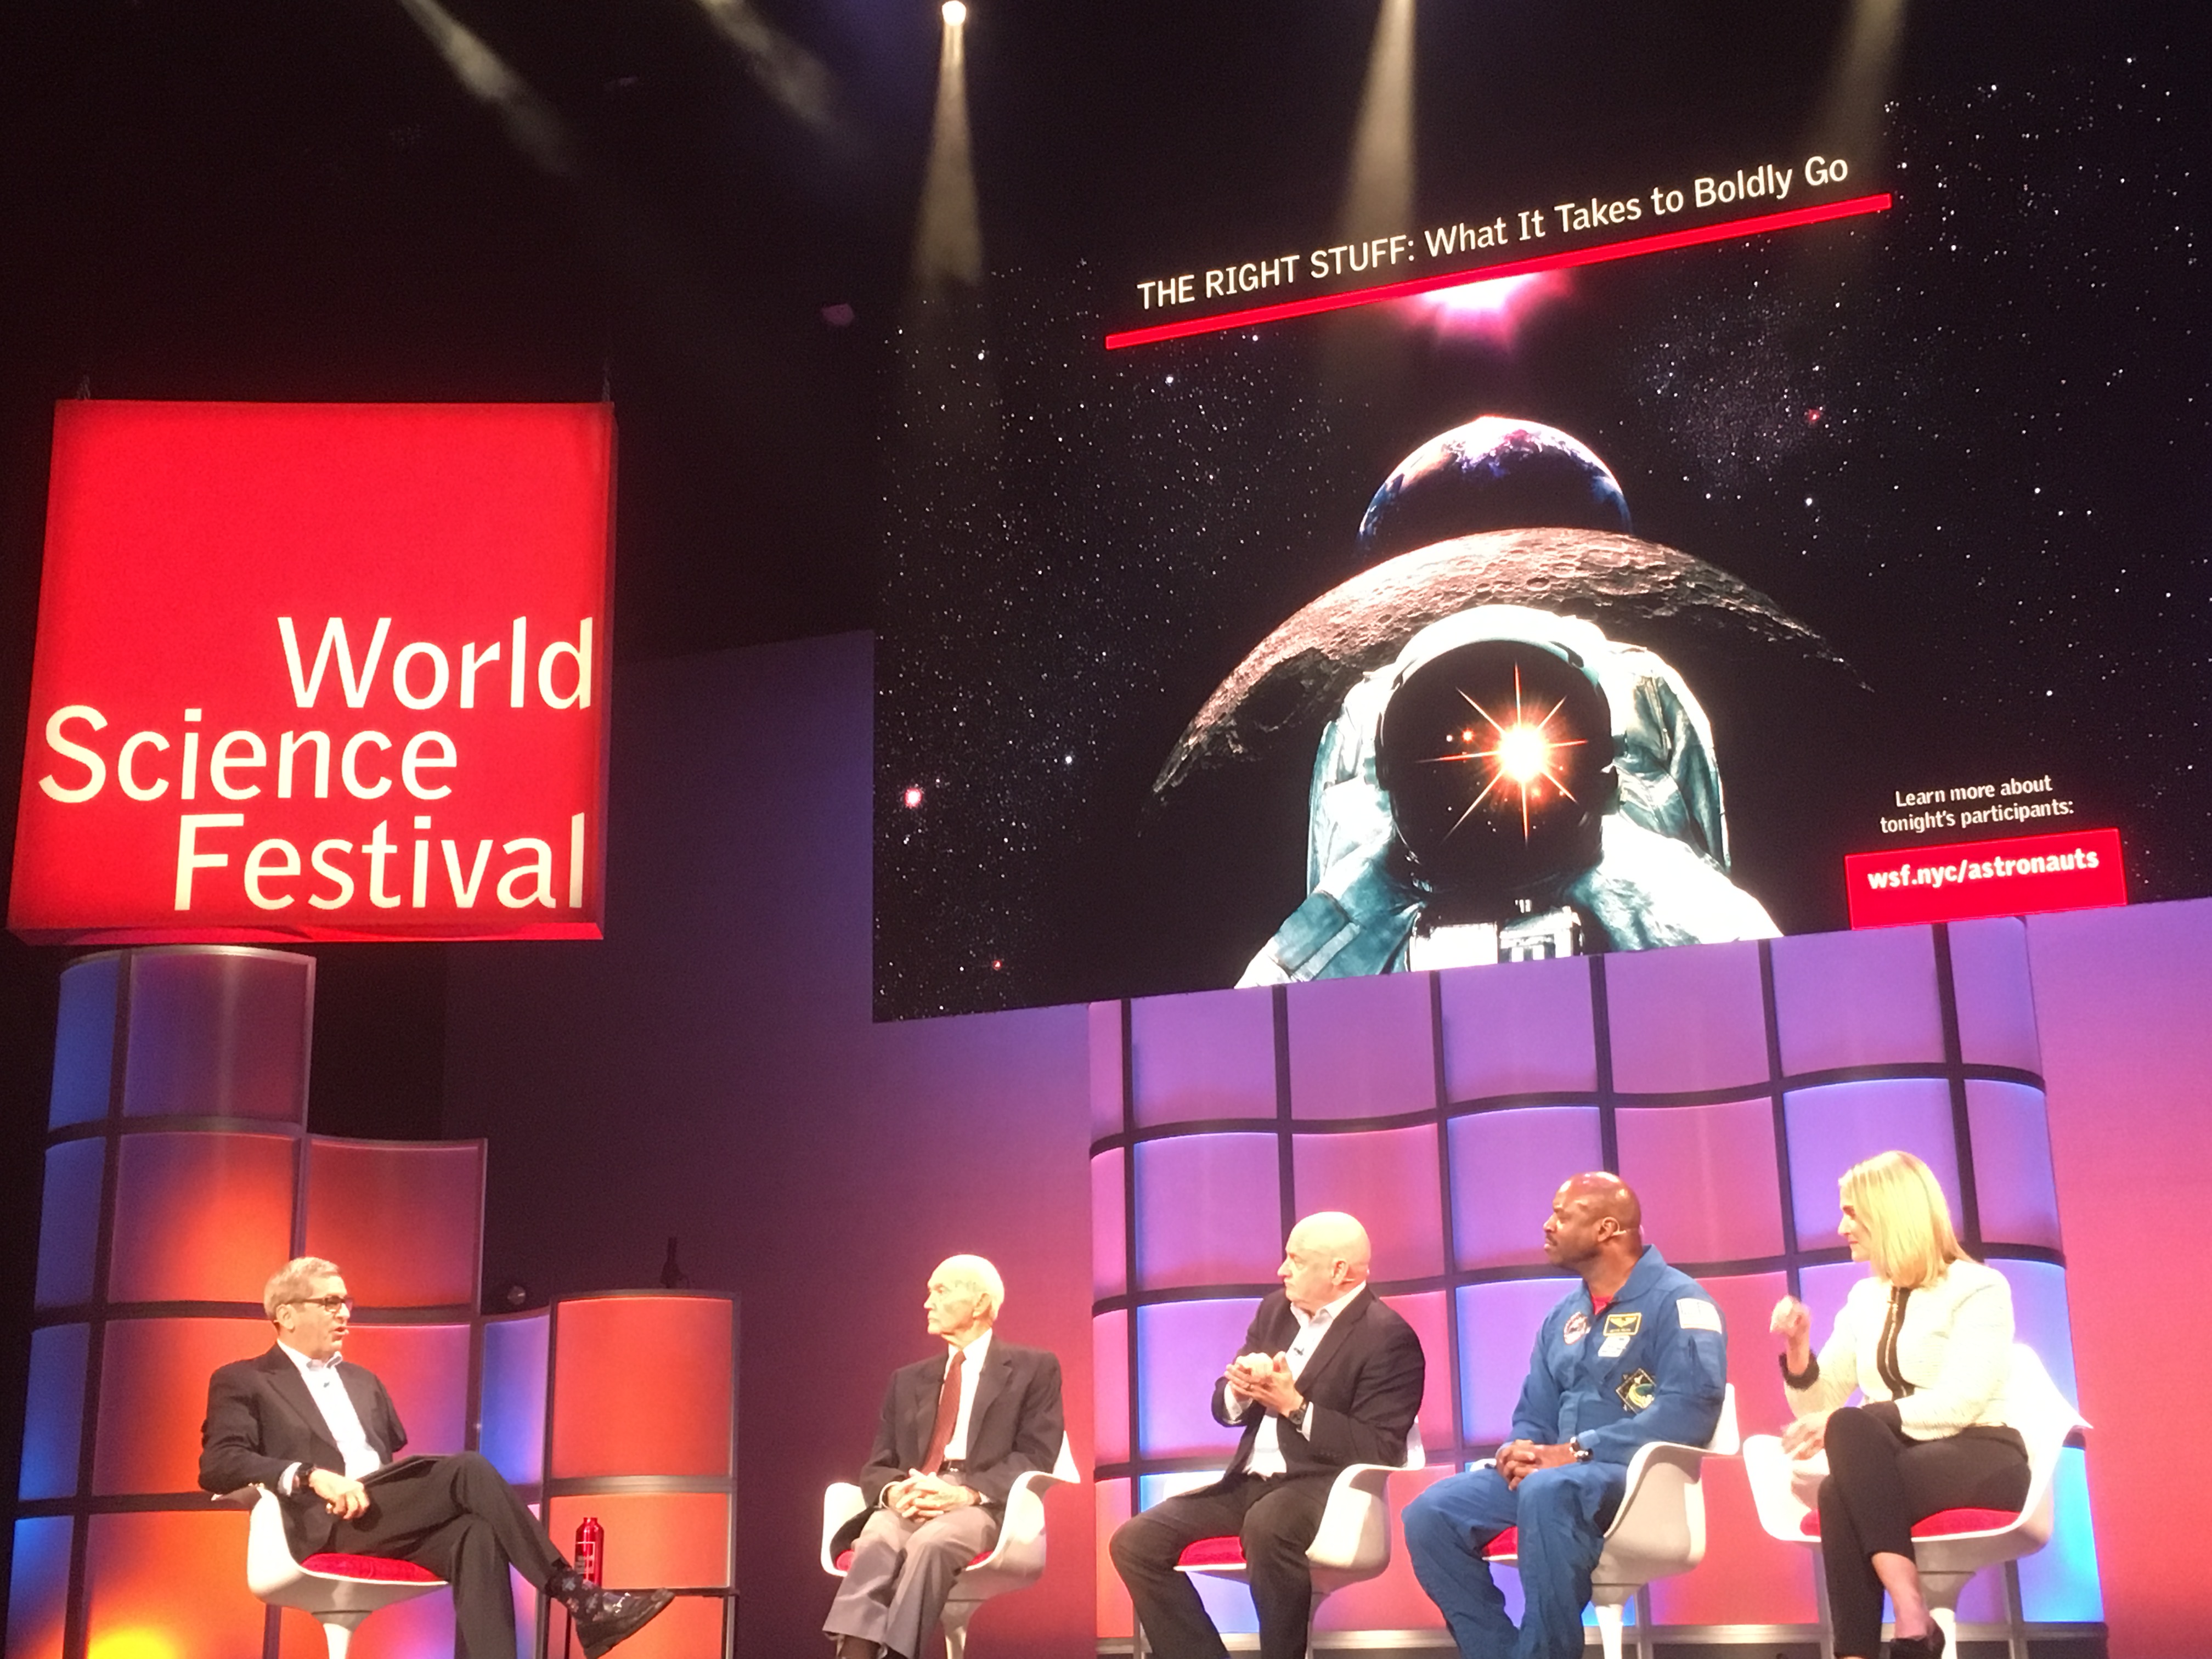 [WSF19] Apollo 11 astronaut Michael Collins charts our next course: to the Moon or Mars?